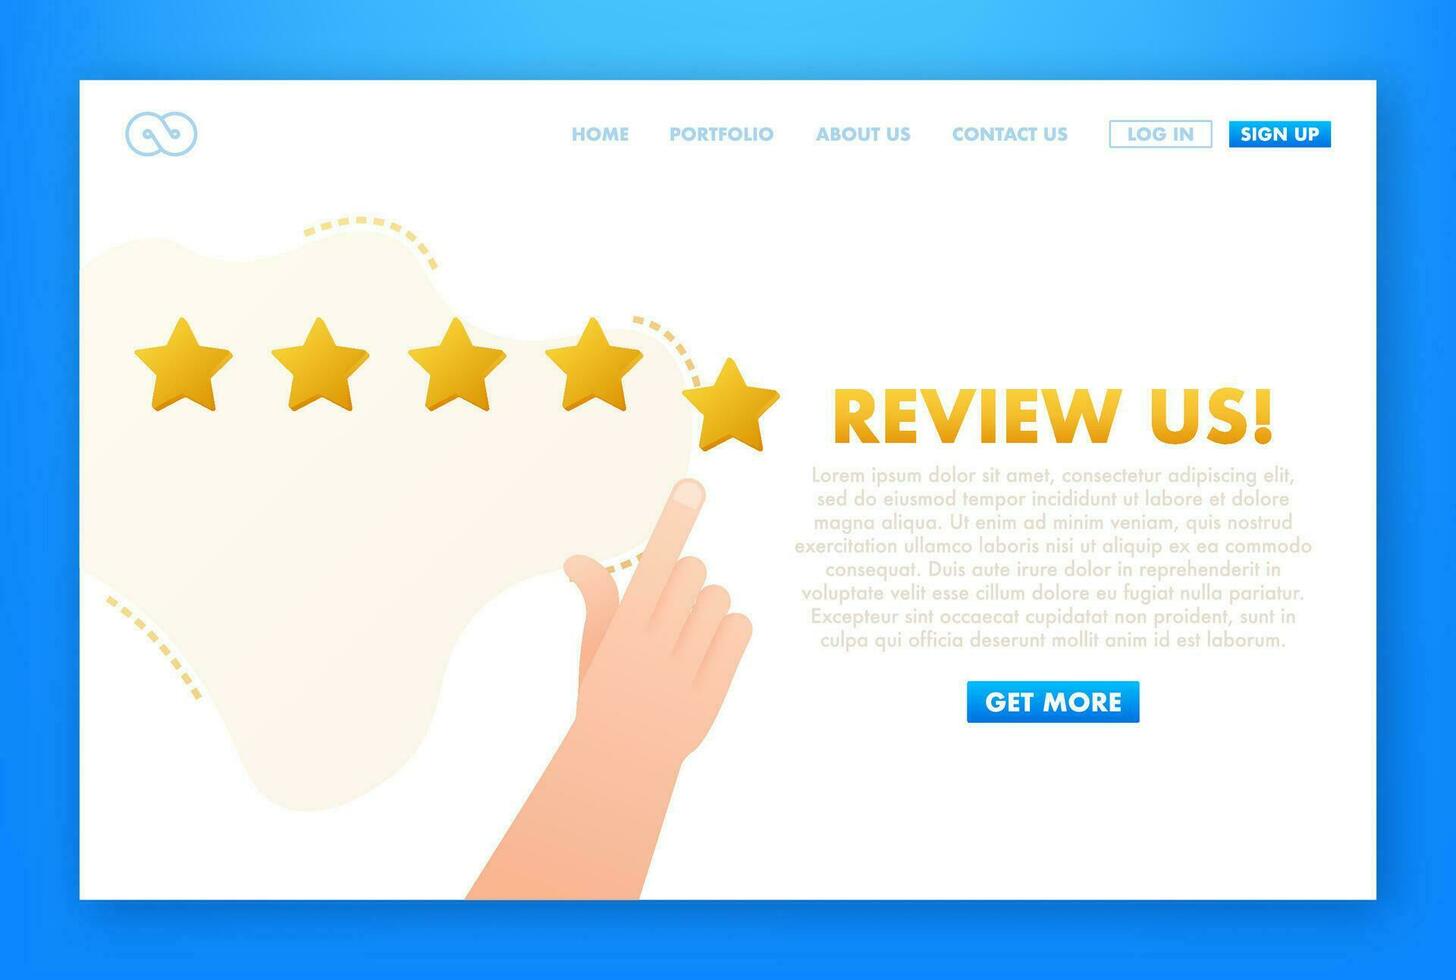 Review us User rating concept. Review and rate us stars. Business concept. Vector illustration.